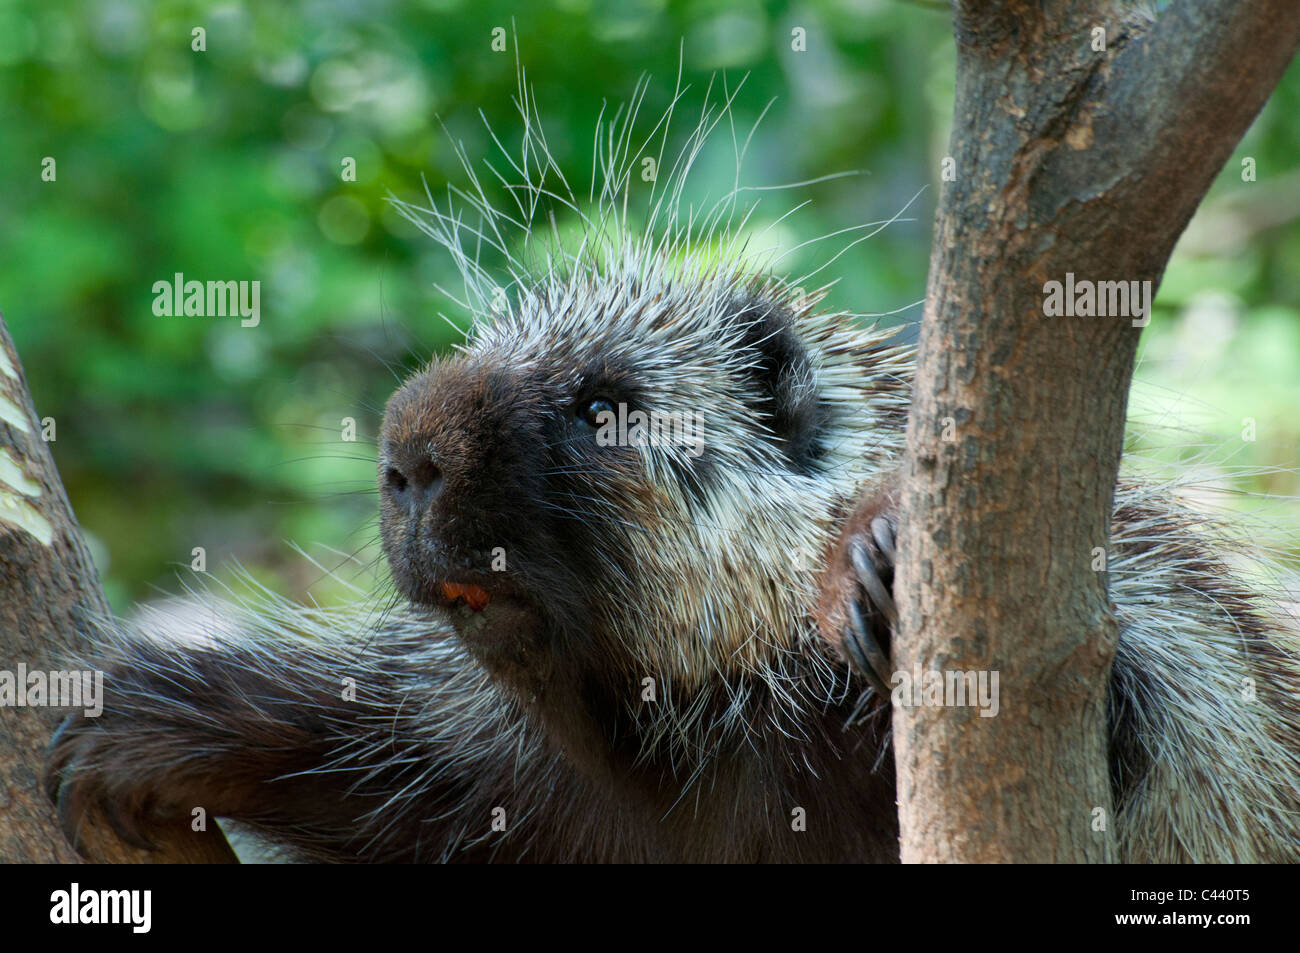 A Canadian Porcupine in a tree. Stock Photo